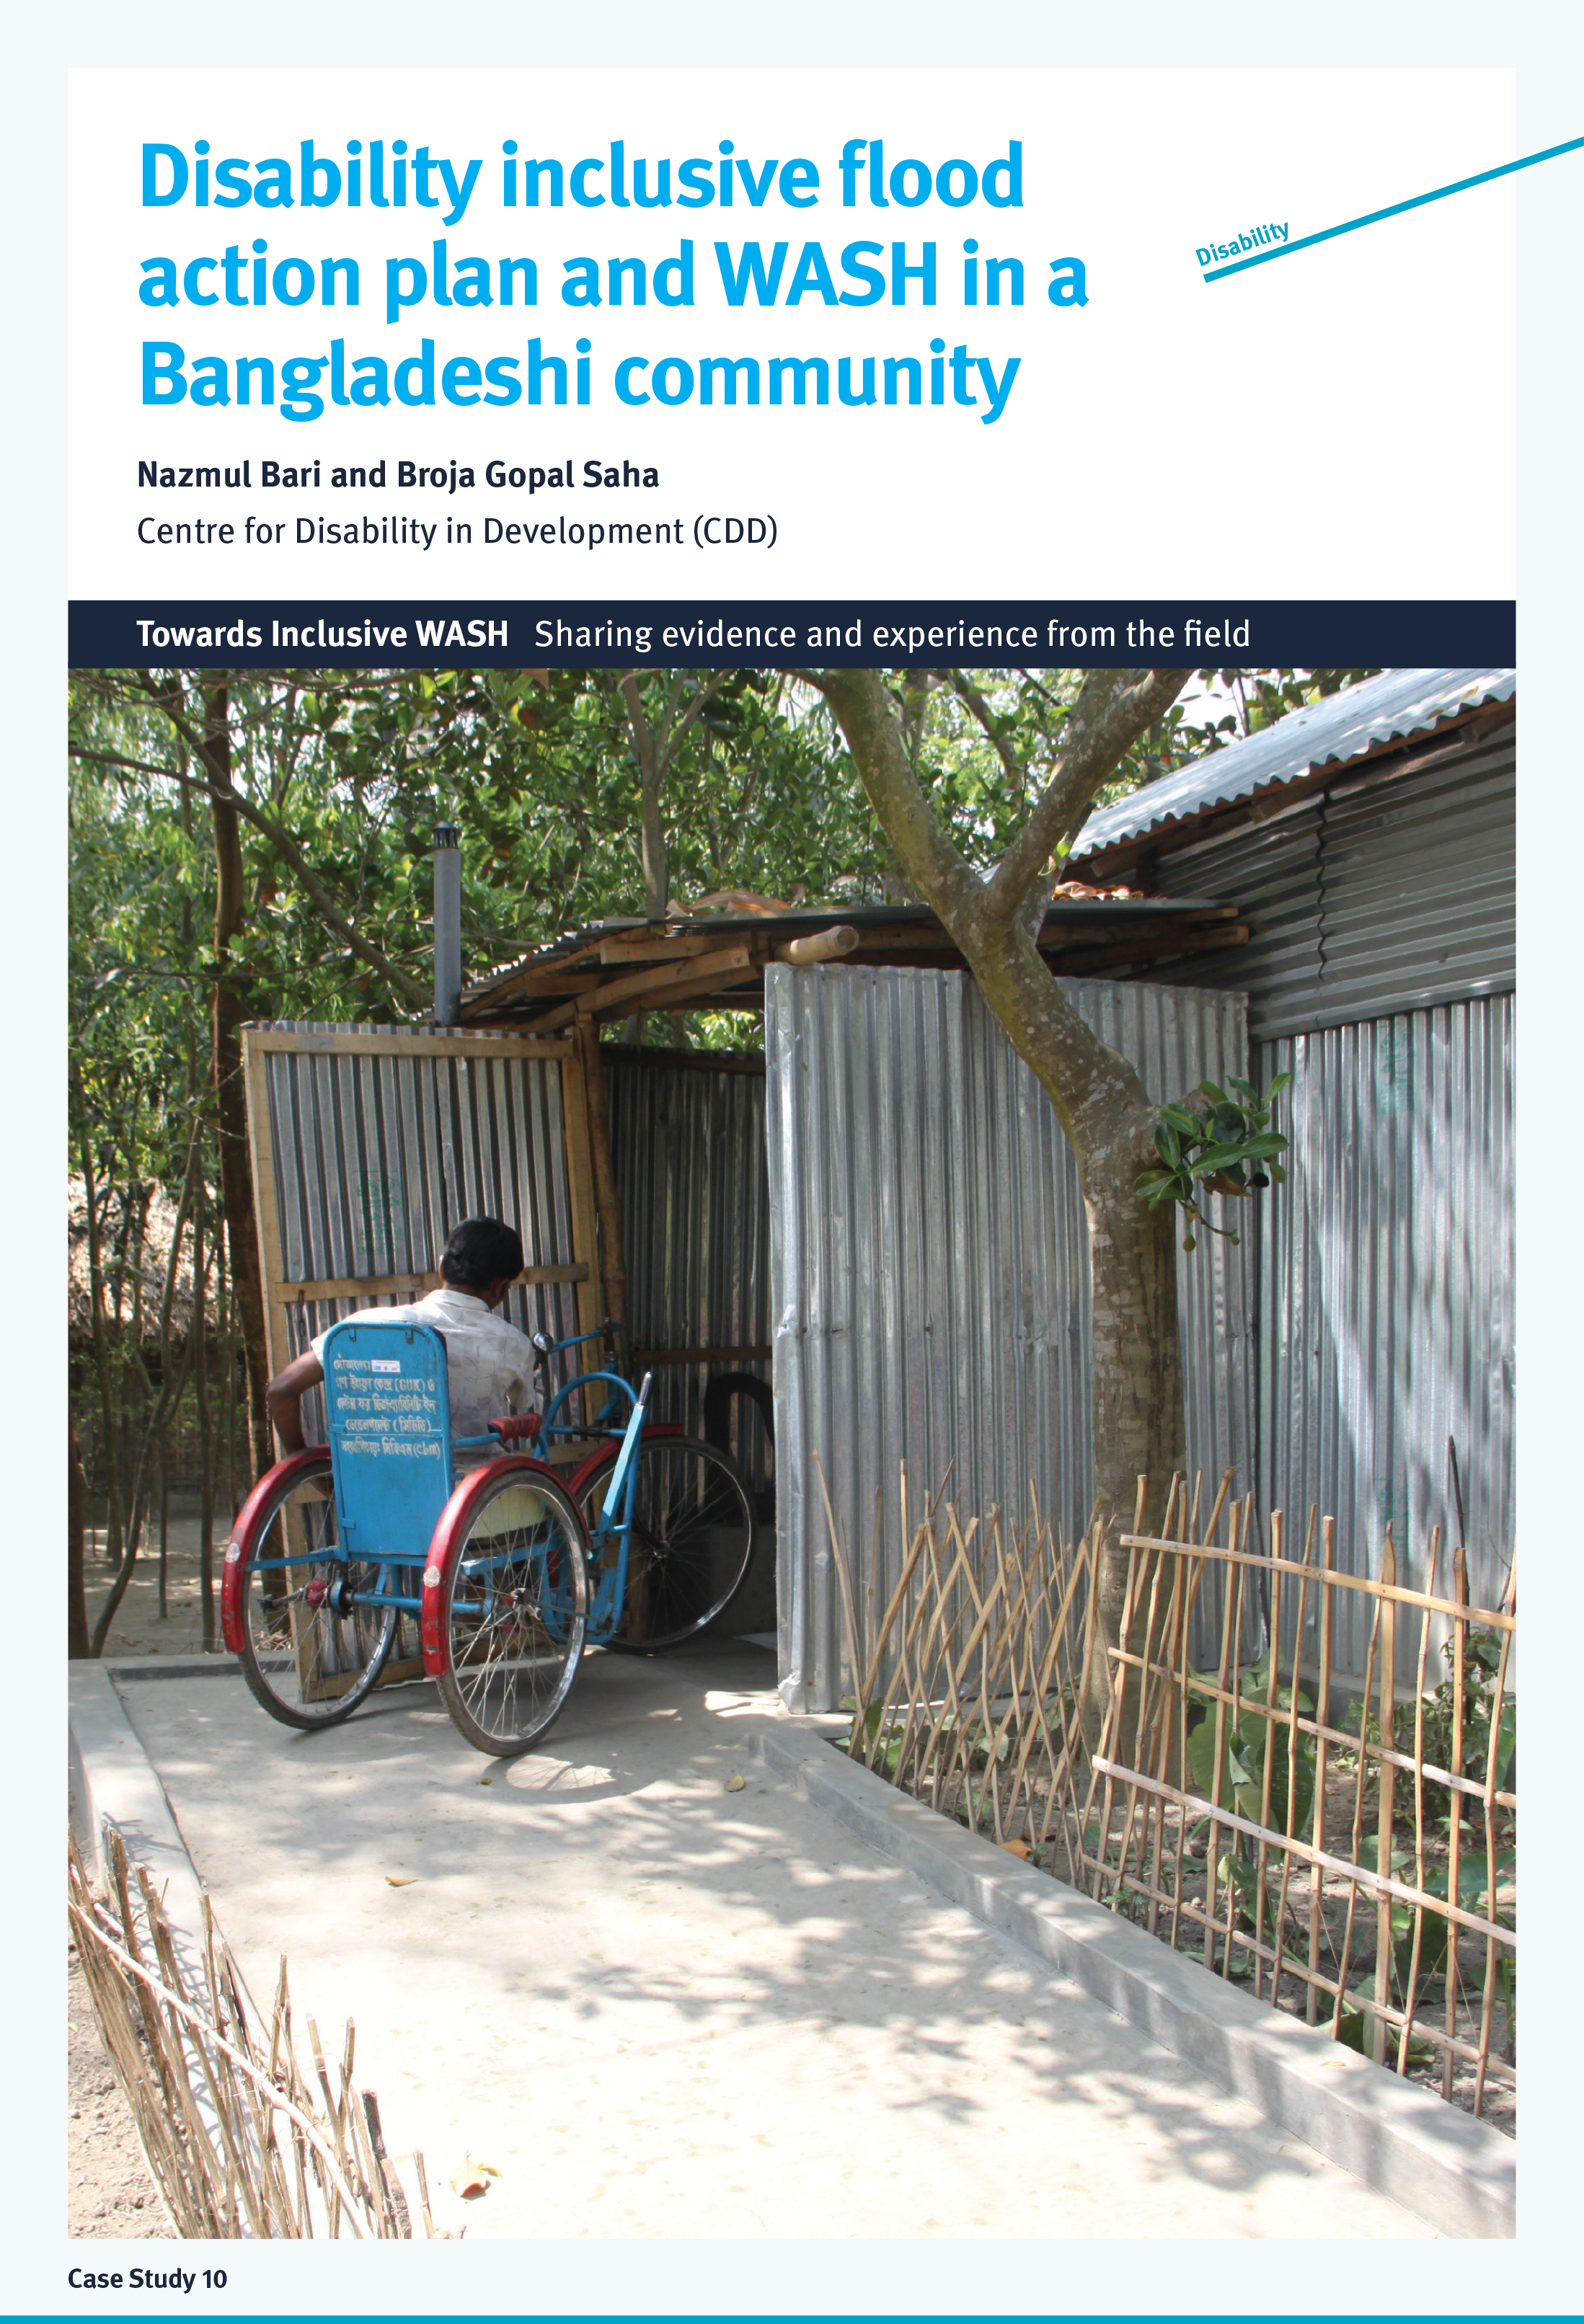 Disability inclusive flood action plan and WASH in a Bangladeshi community